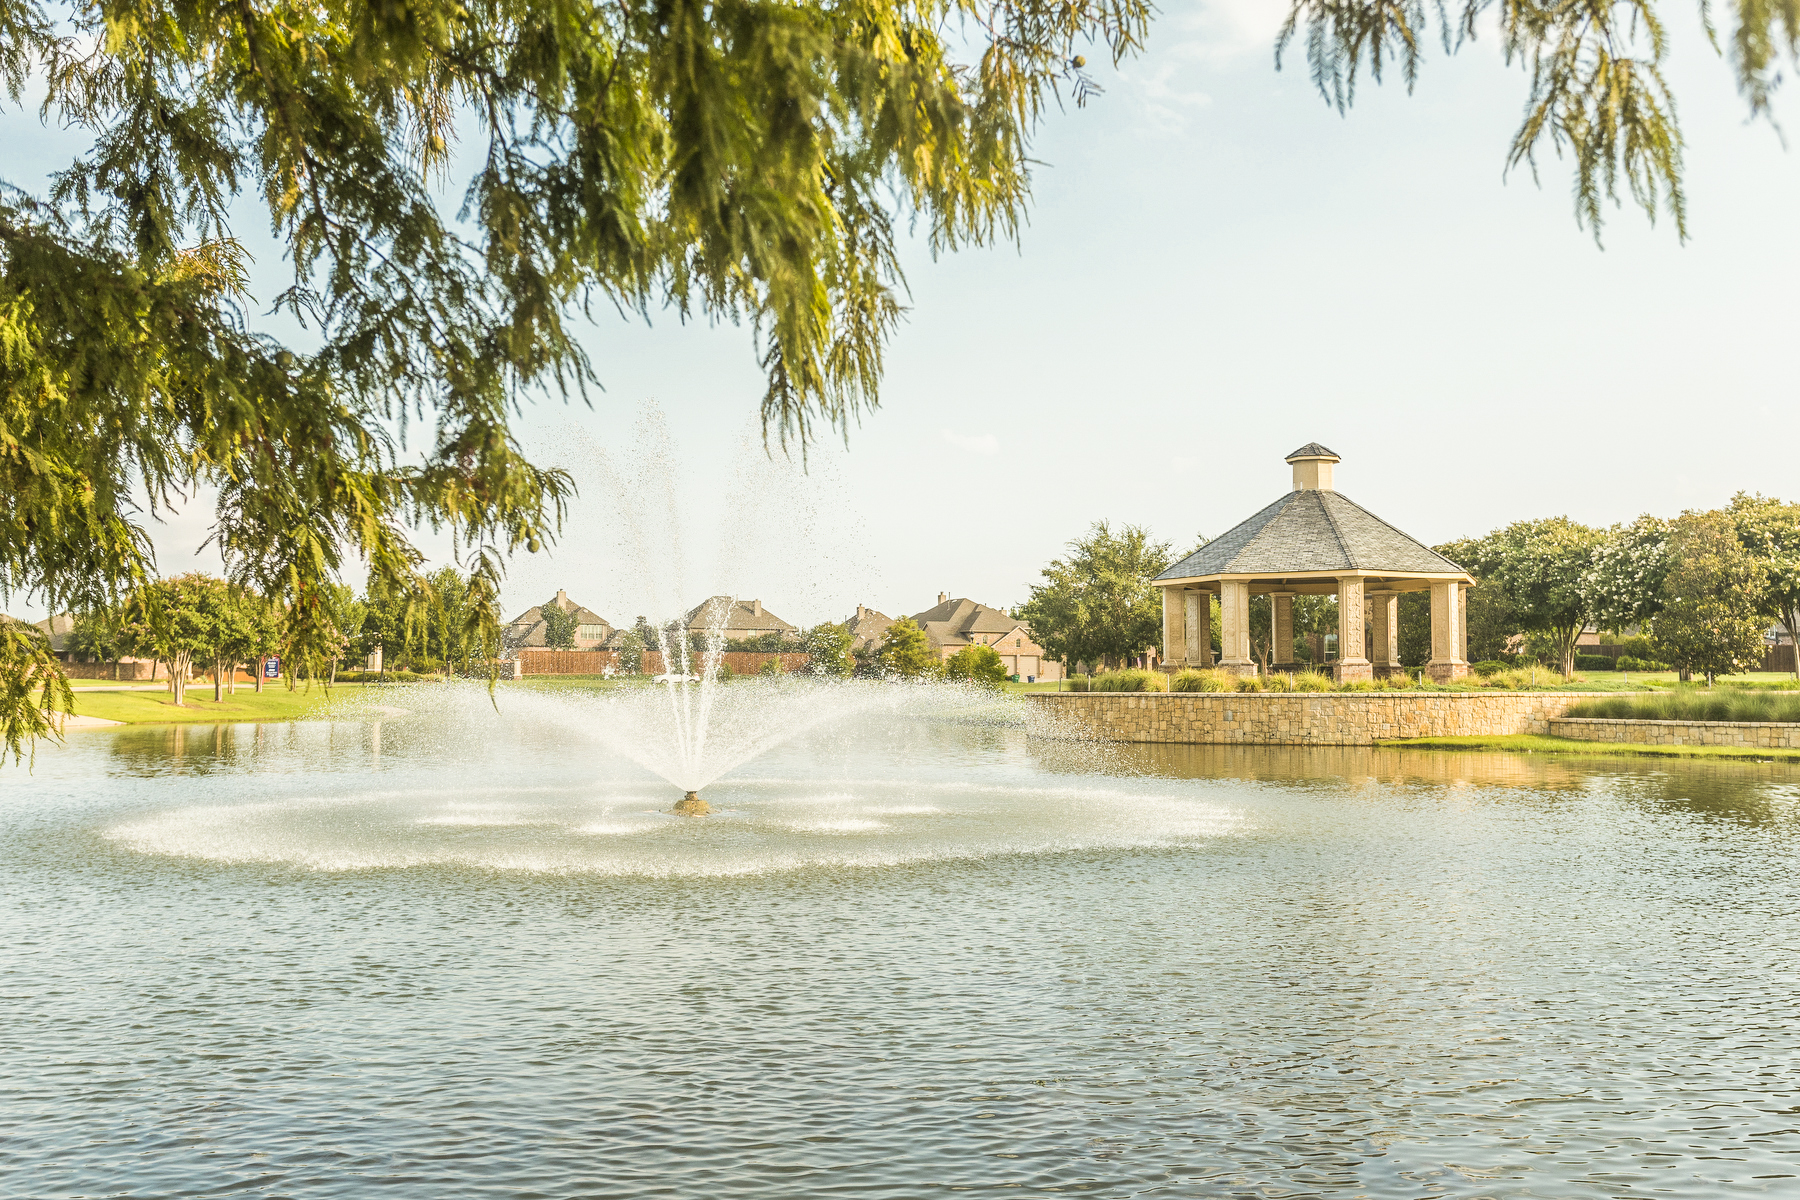 The lake at Liberty with a fountain and gazebo in the background